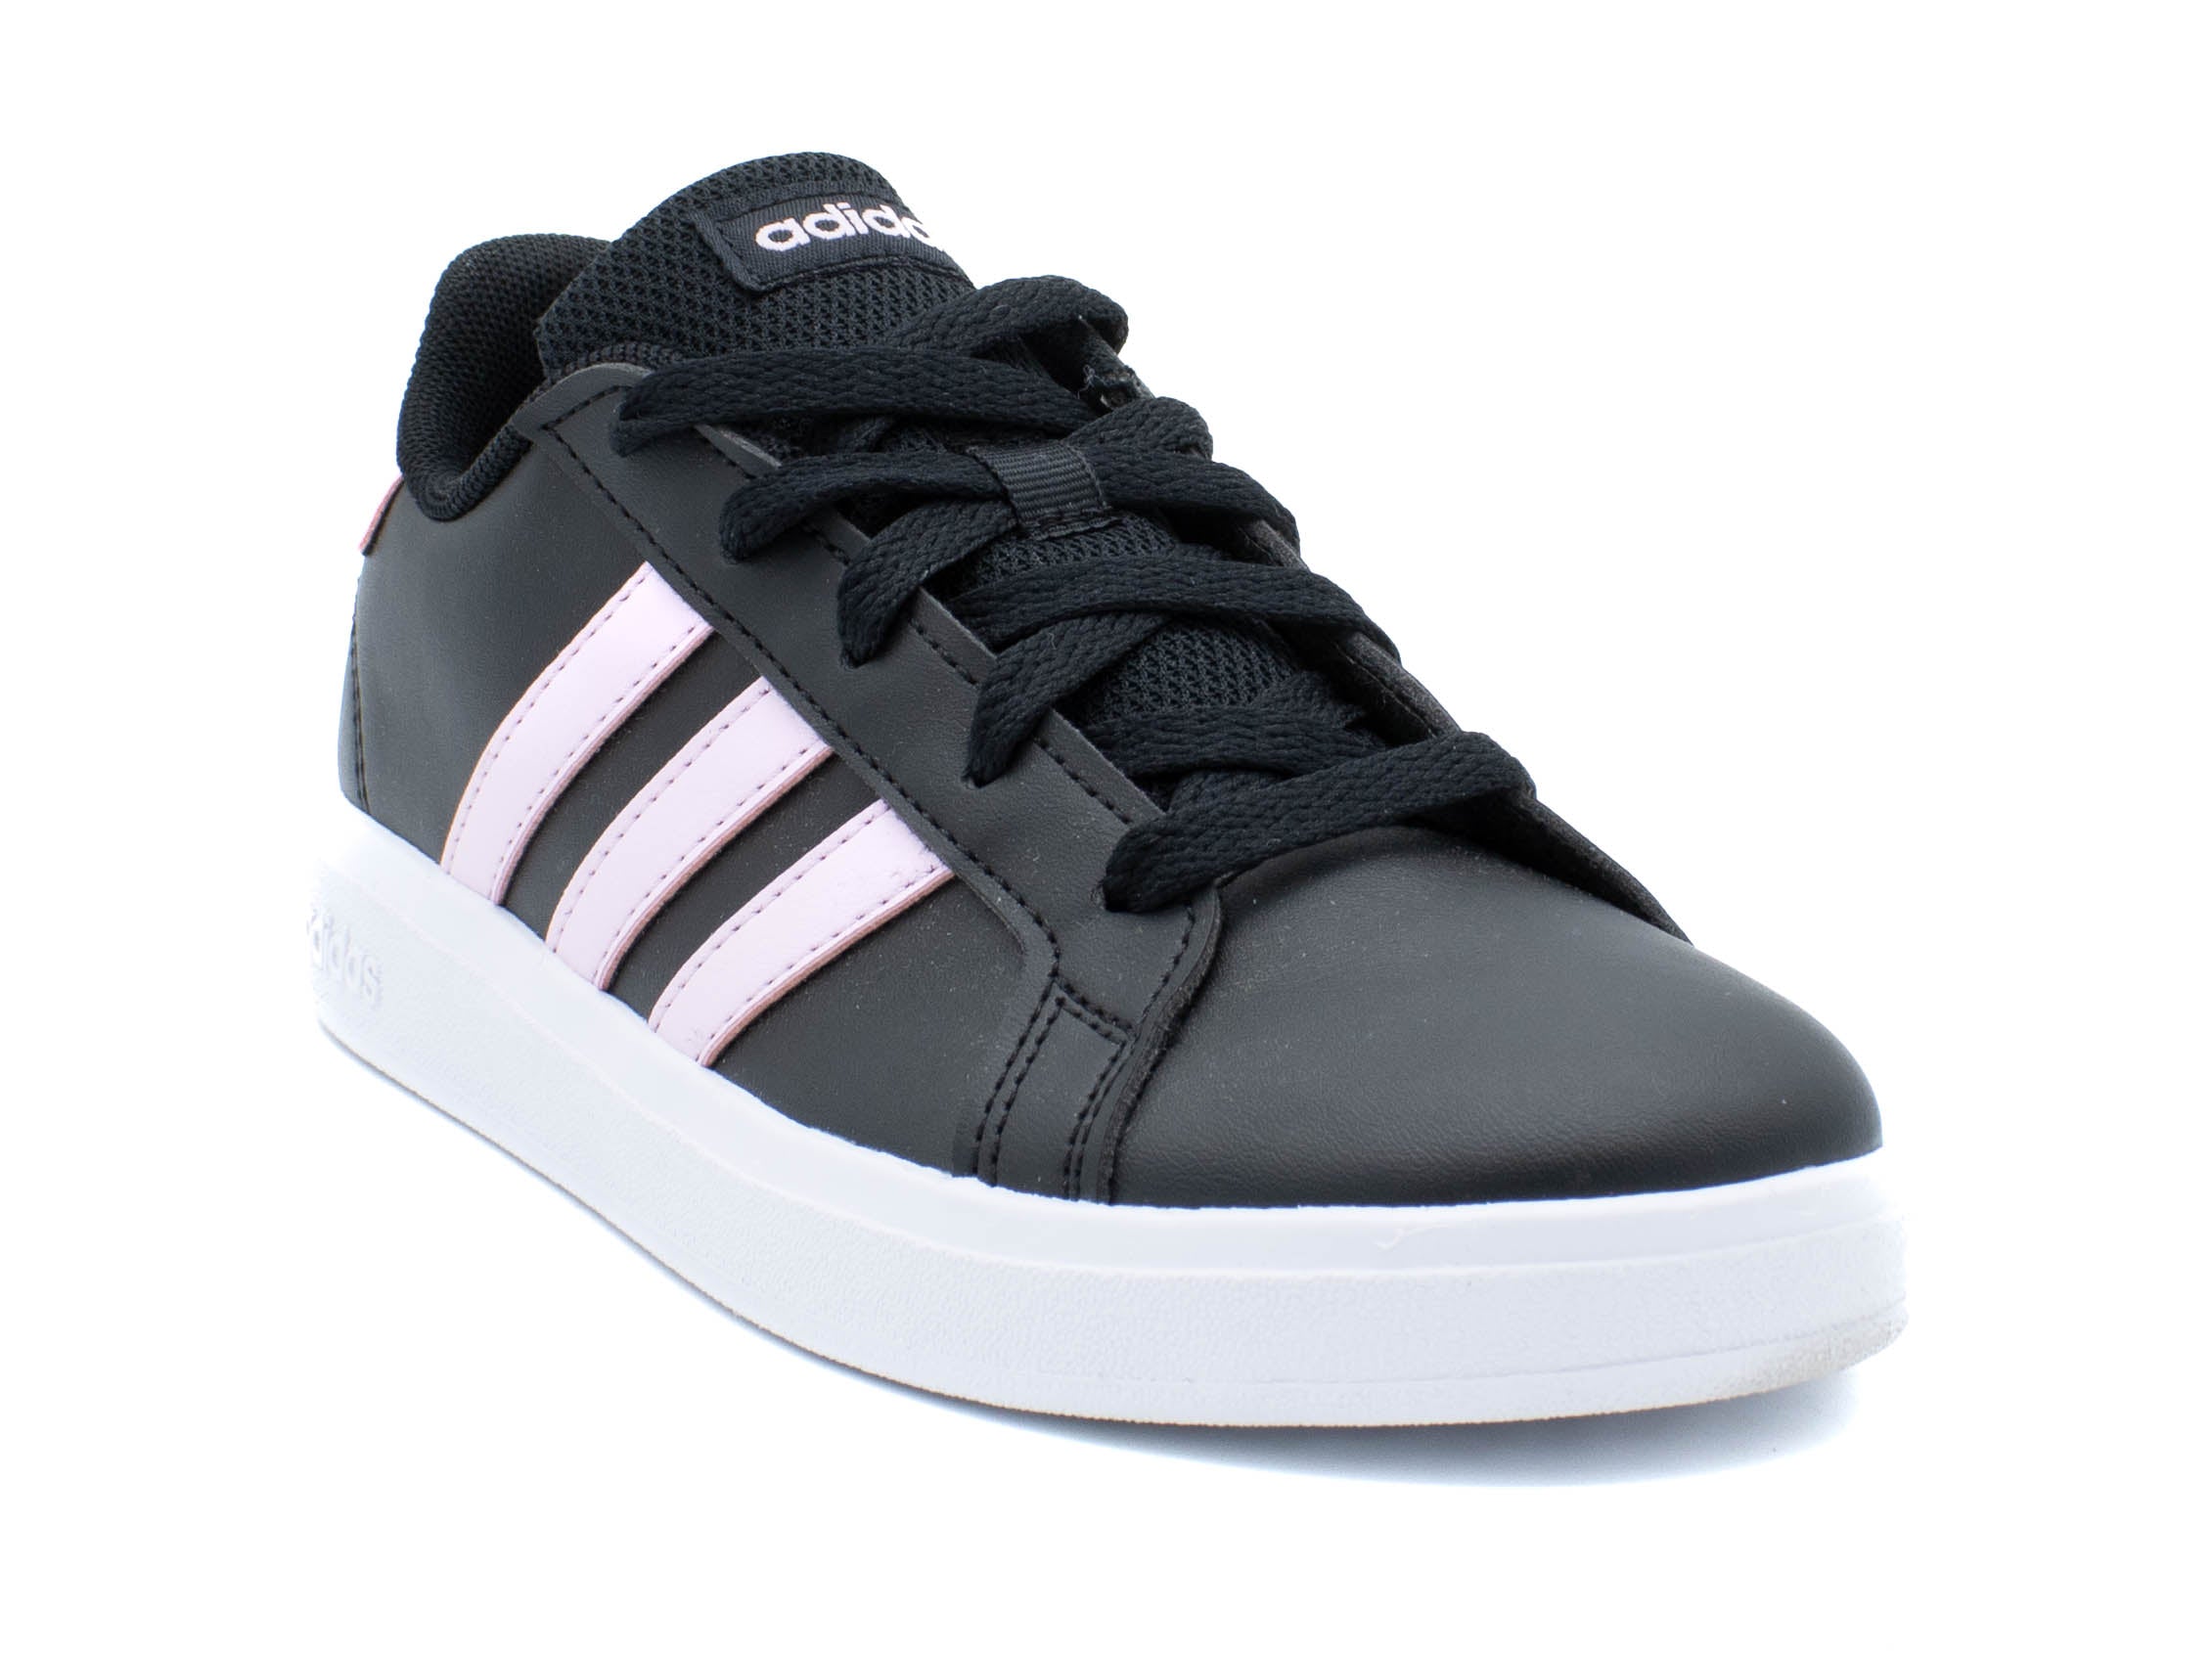 ADIDAS Counterpoint